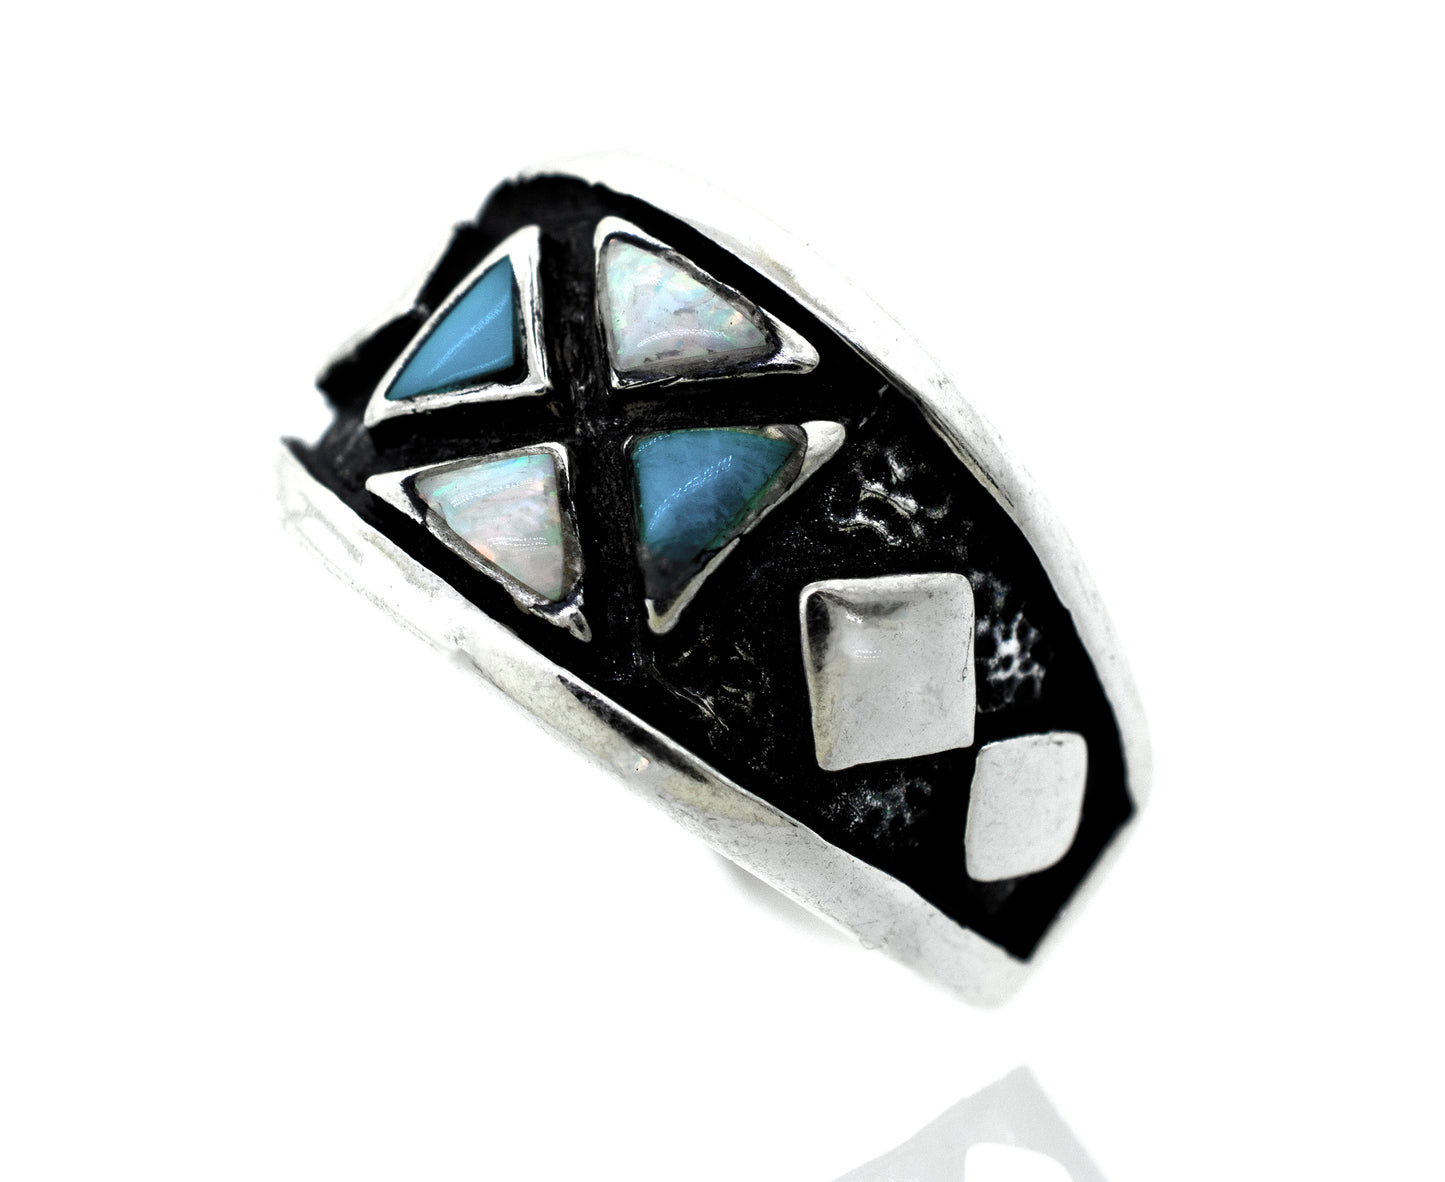 A Super Silver American Made Men's Opal and Turquoise Ring with a blue stone and diamonds.